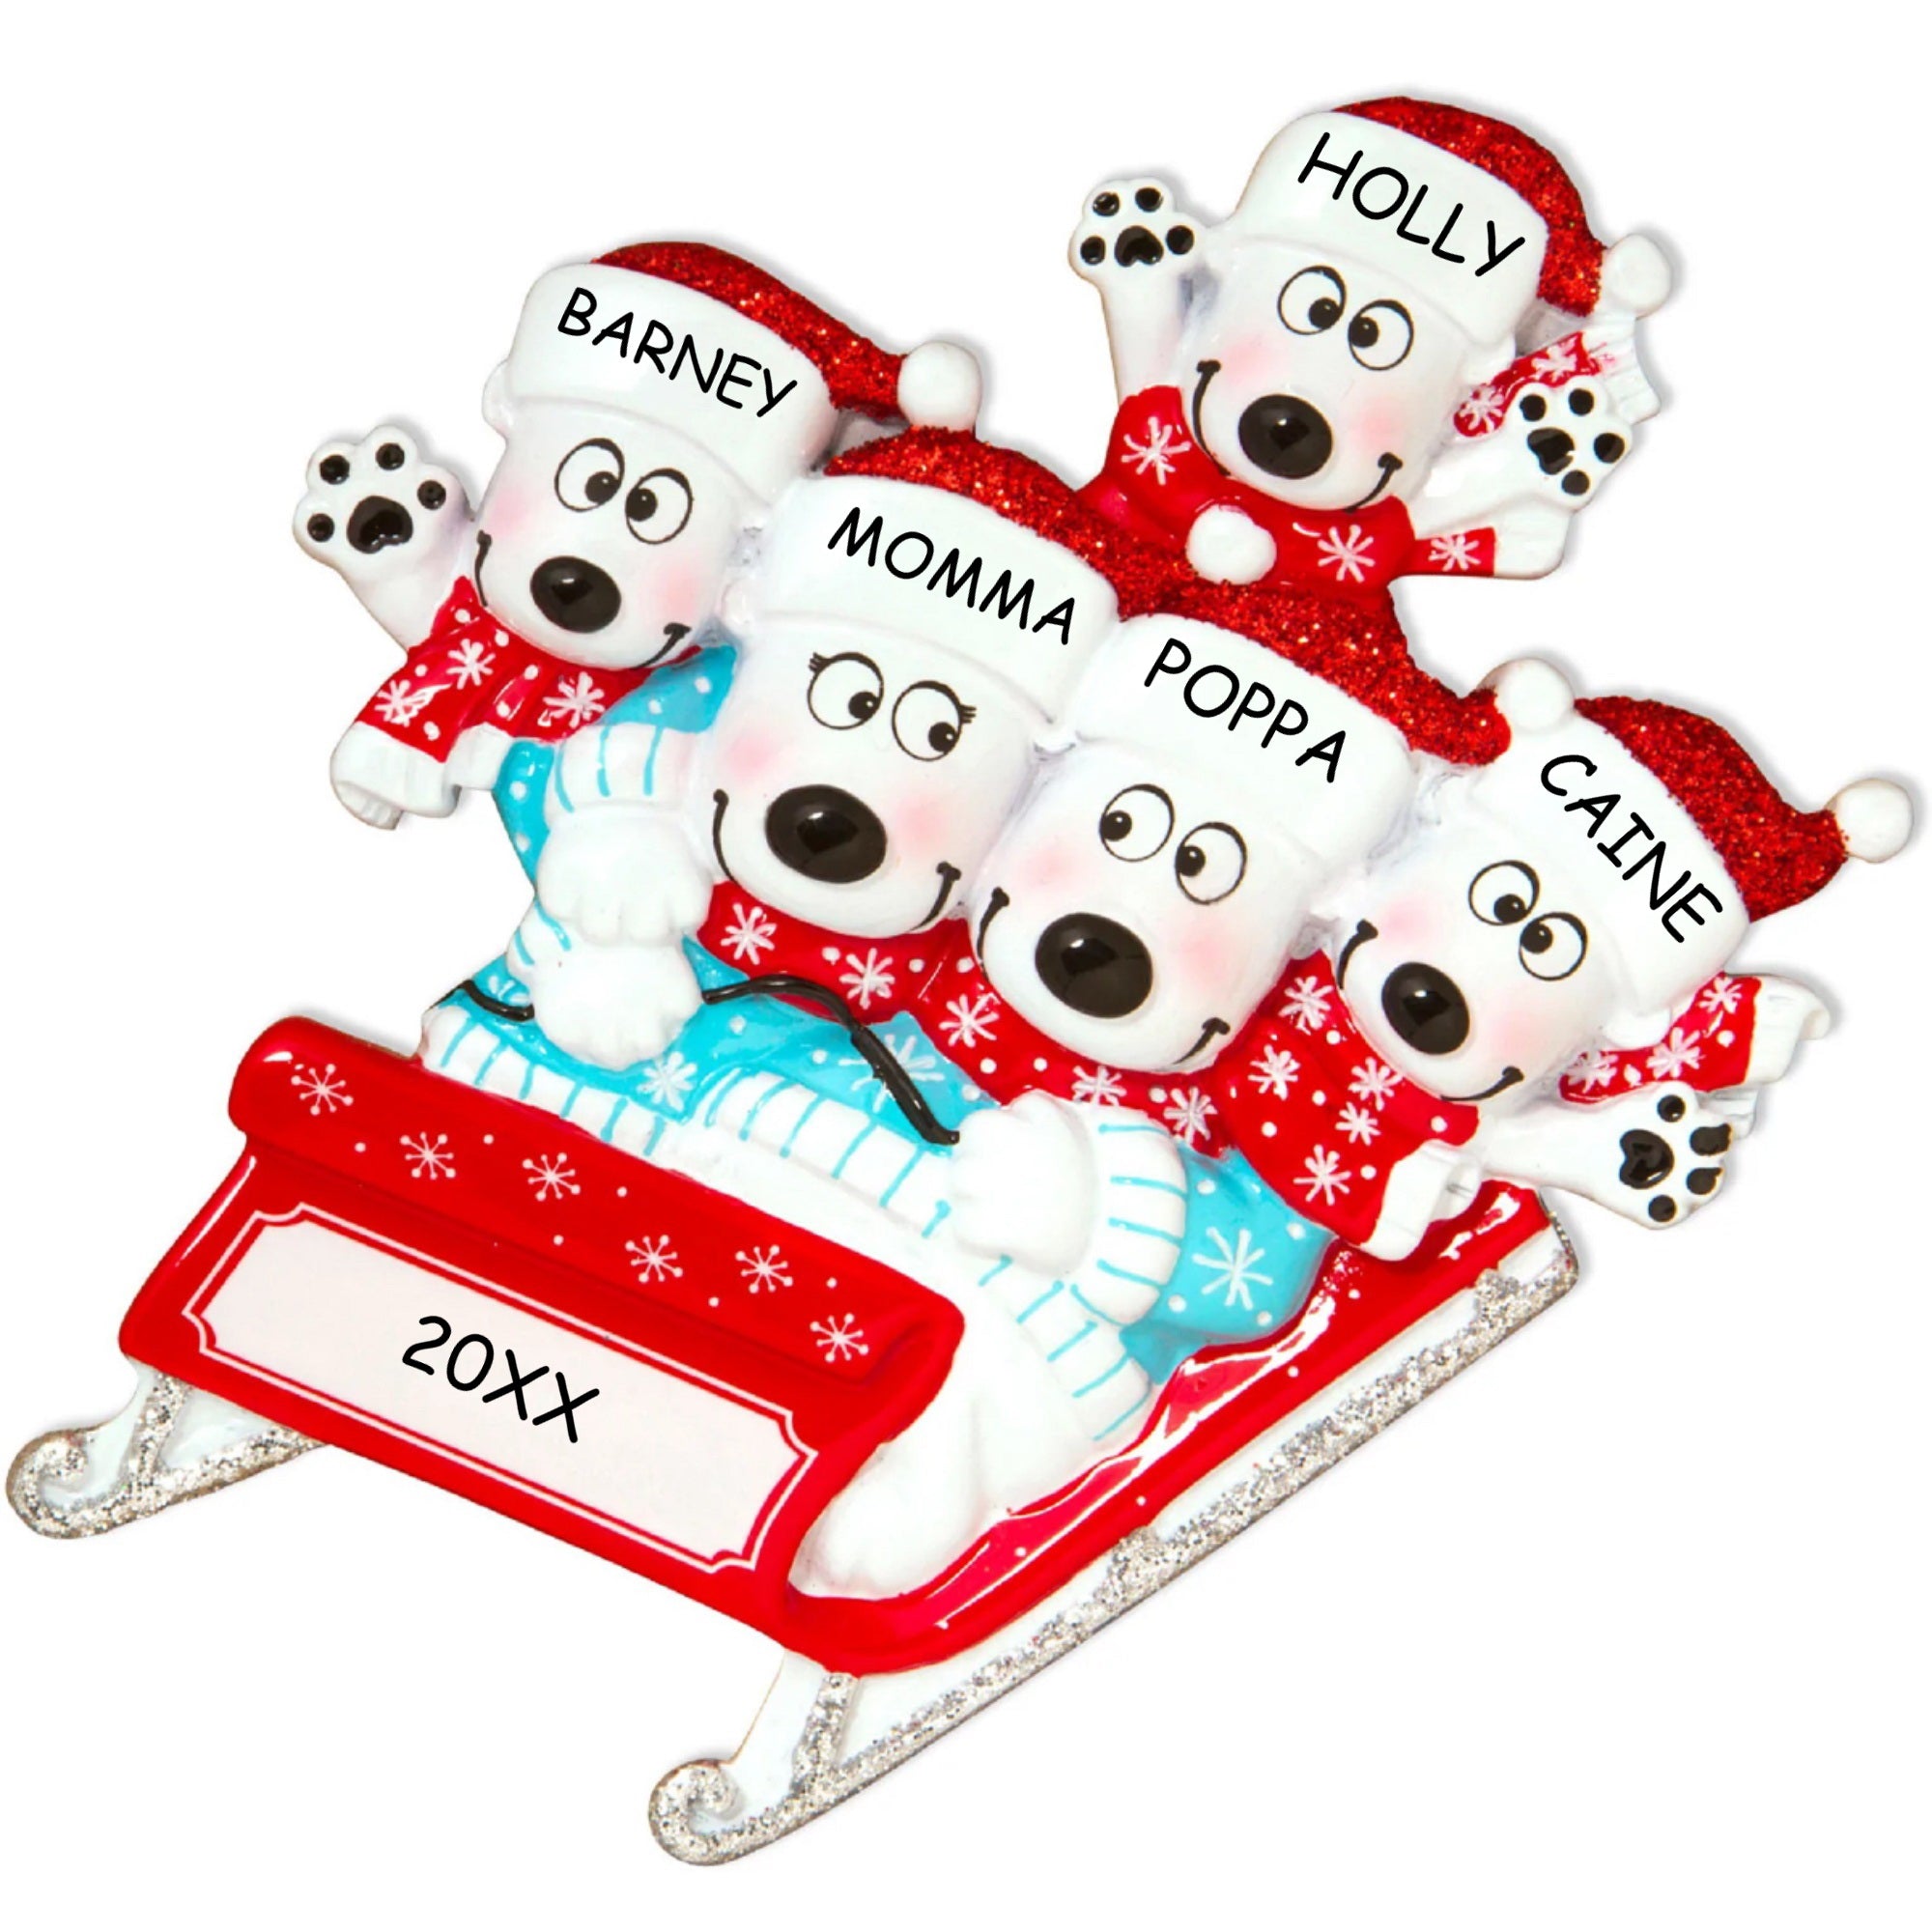 Personalized Bears on Sled Christmas Ornament - Family of 5